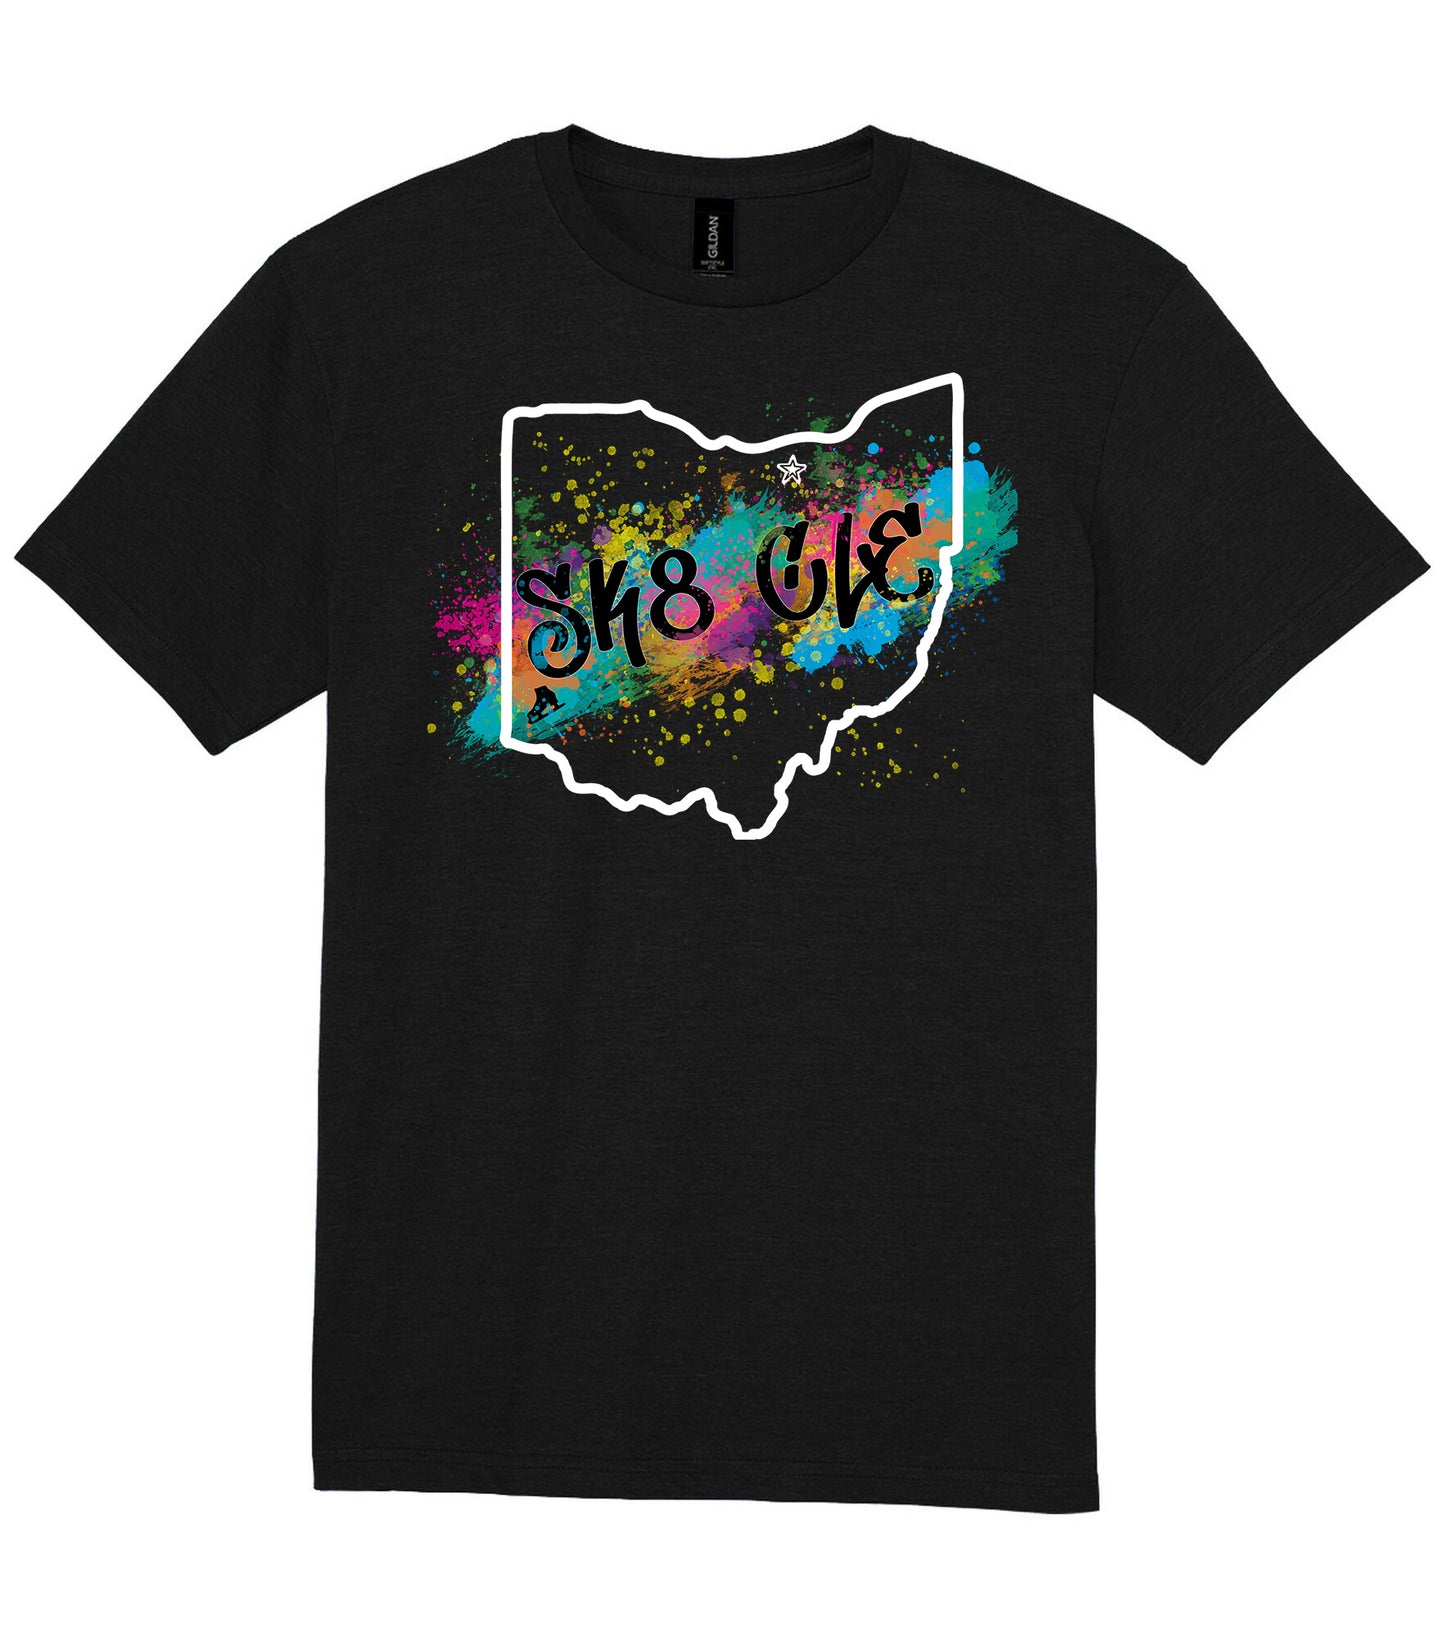 SK8 CLE Black T- Shirt - Available in youth and Adult